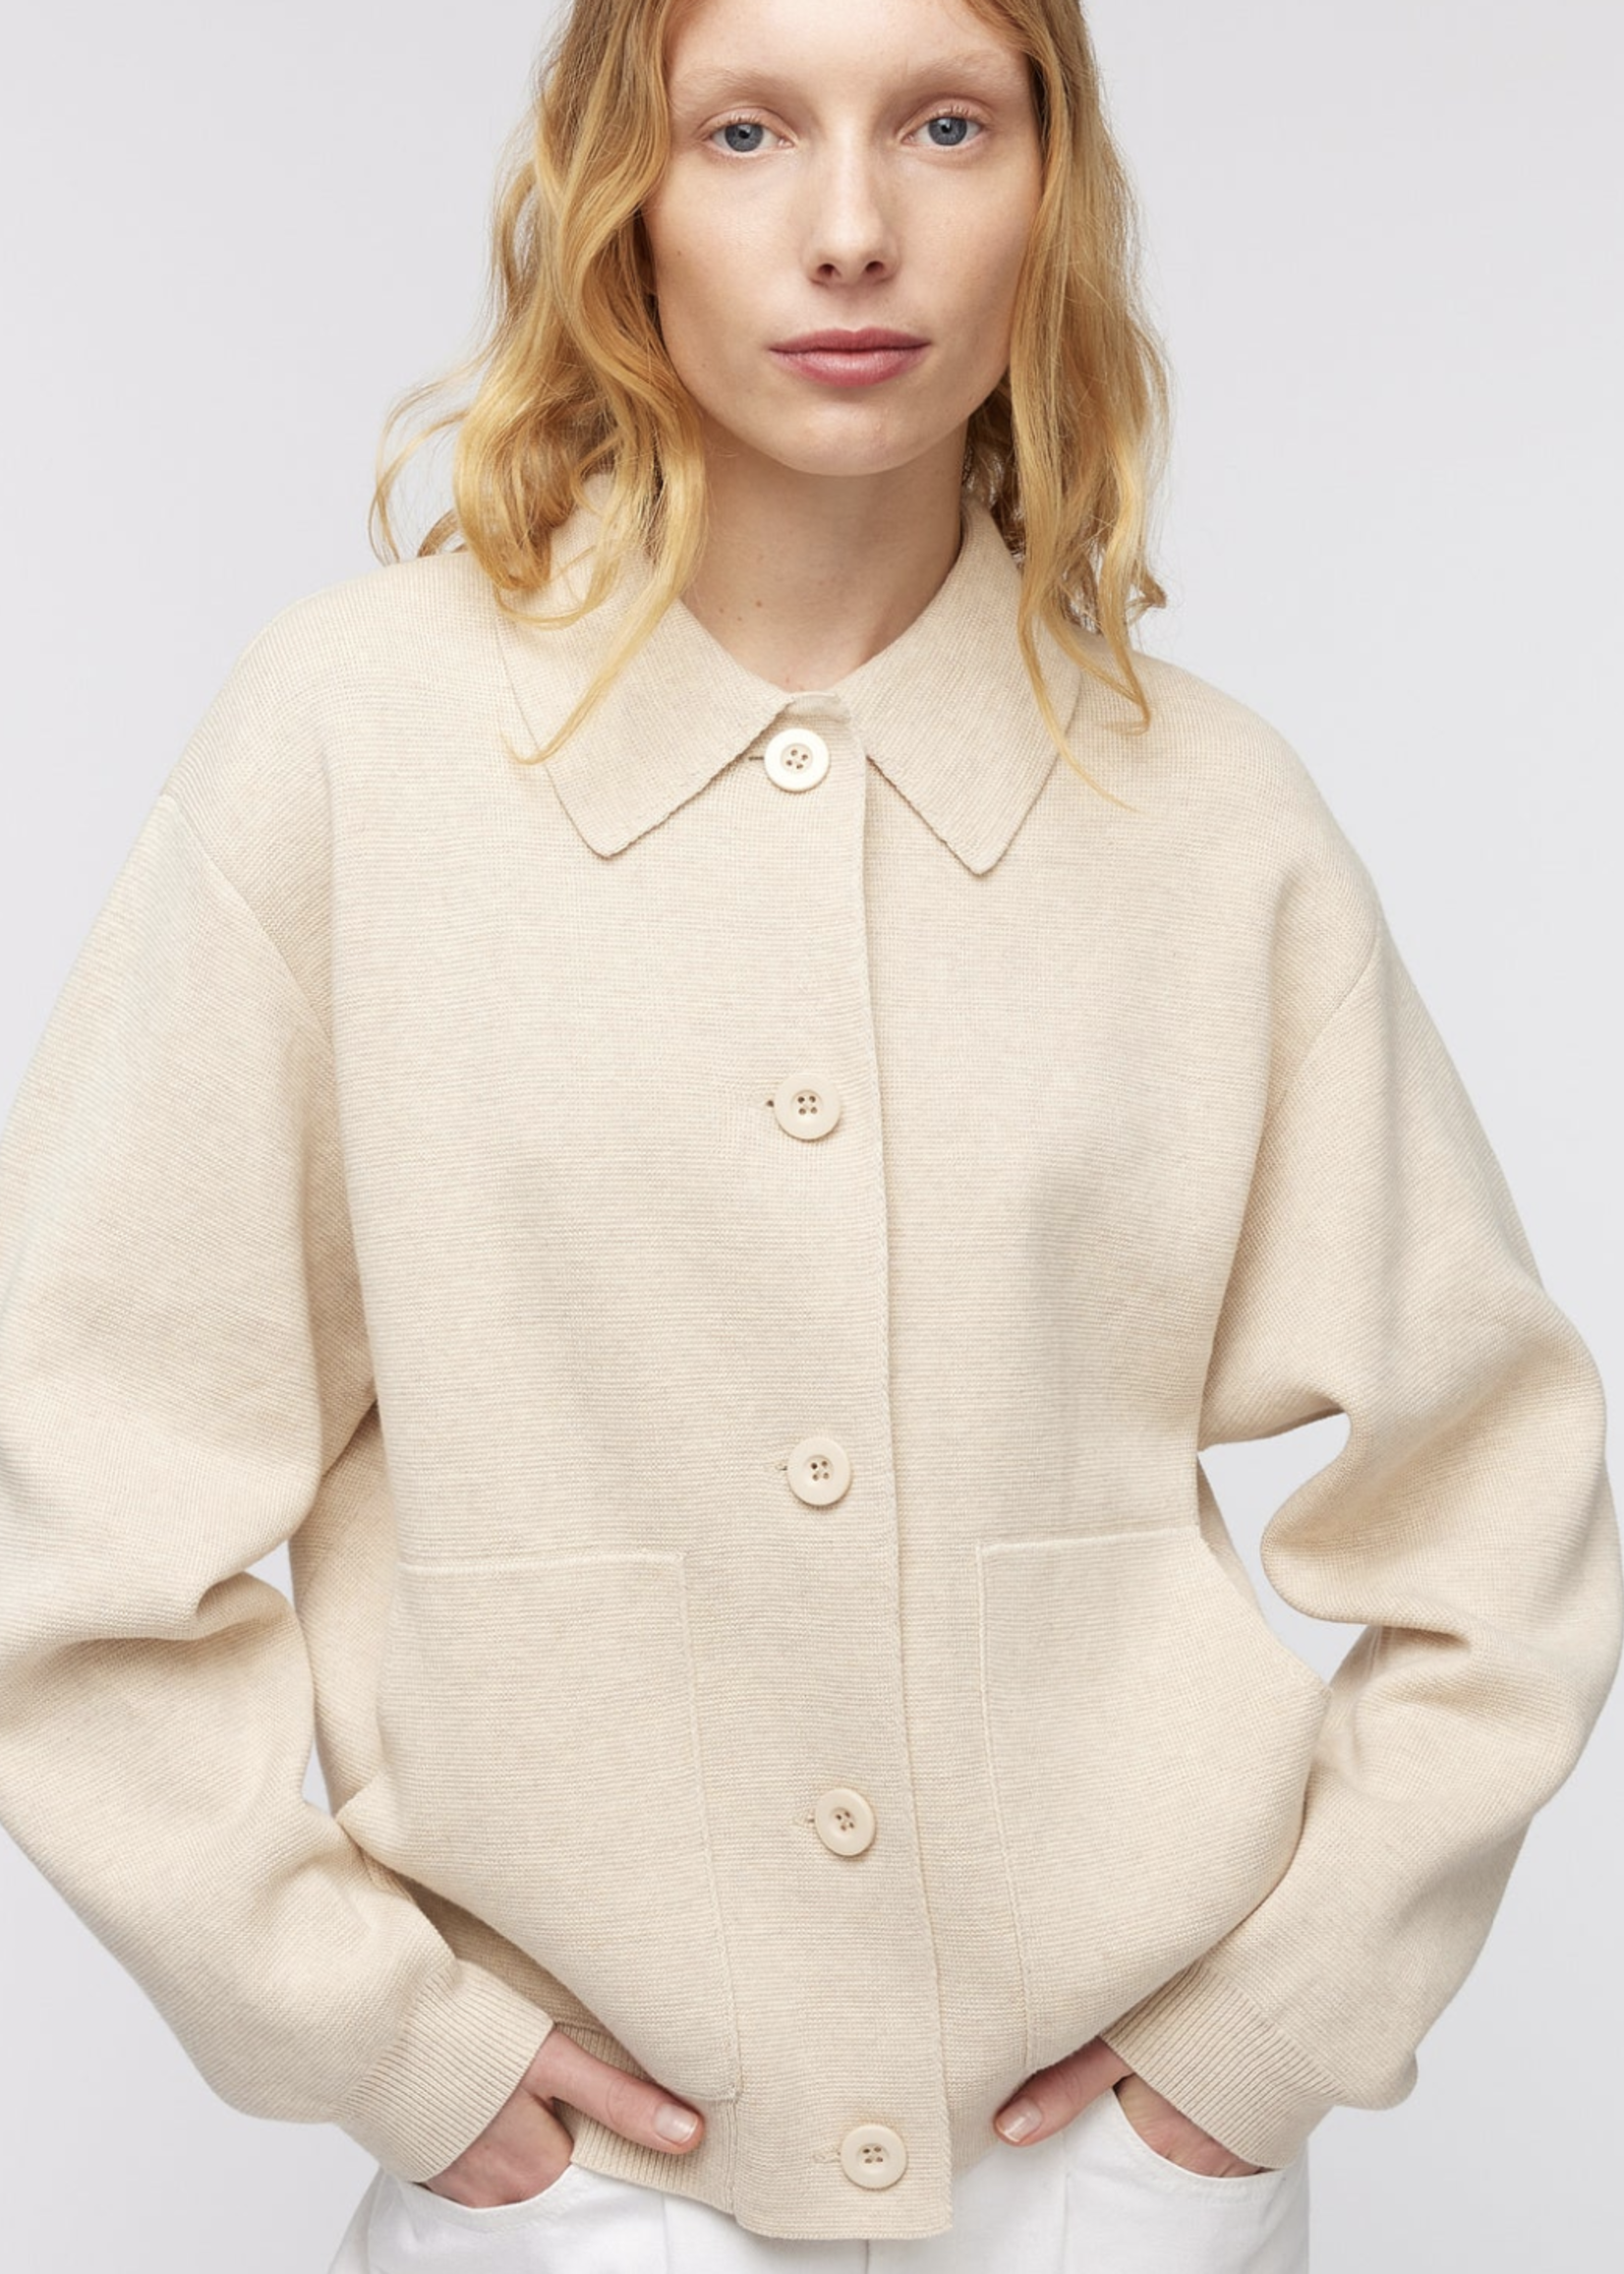 Knit-ted Knit-ted Ricky Cardigan